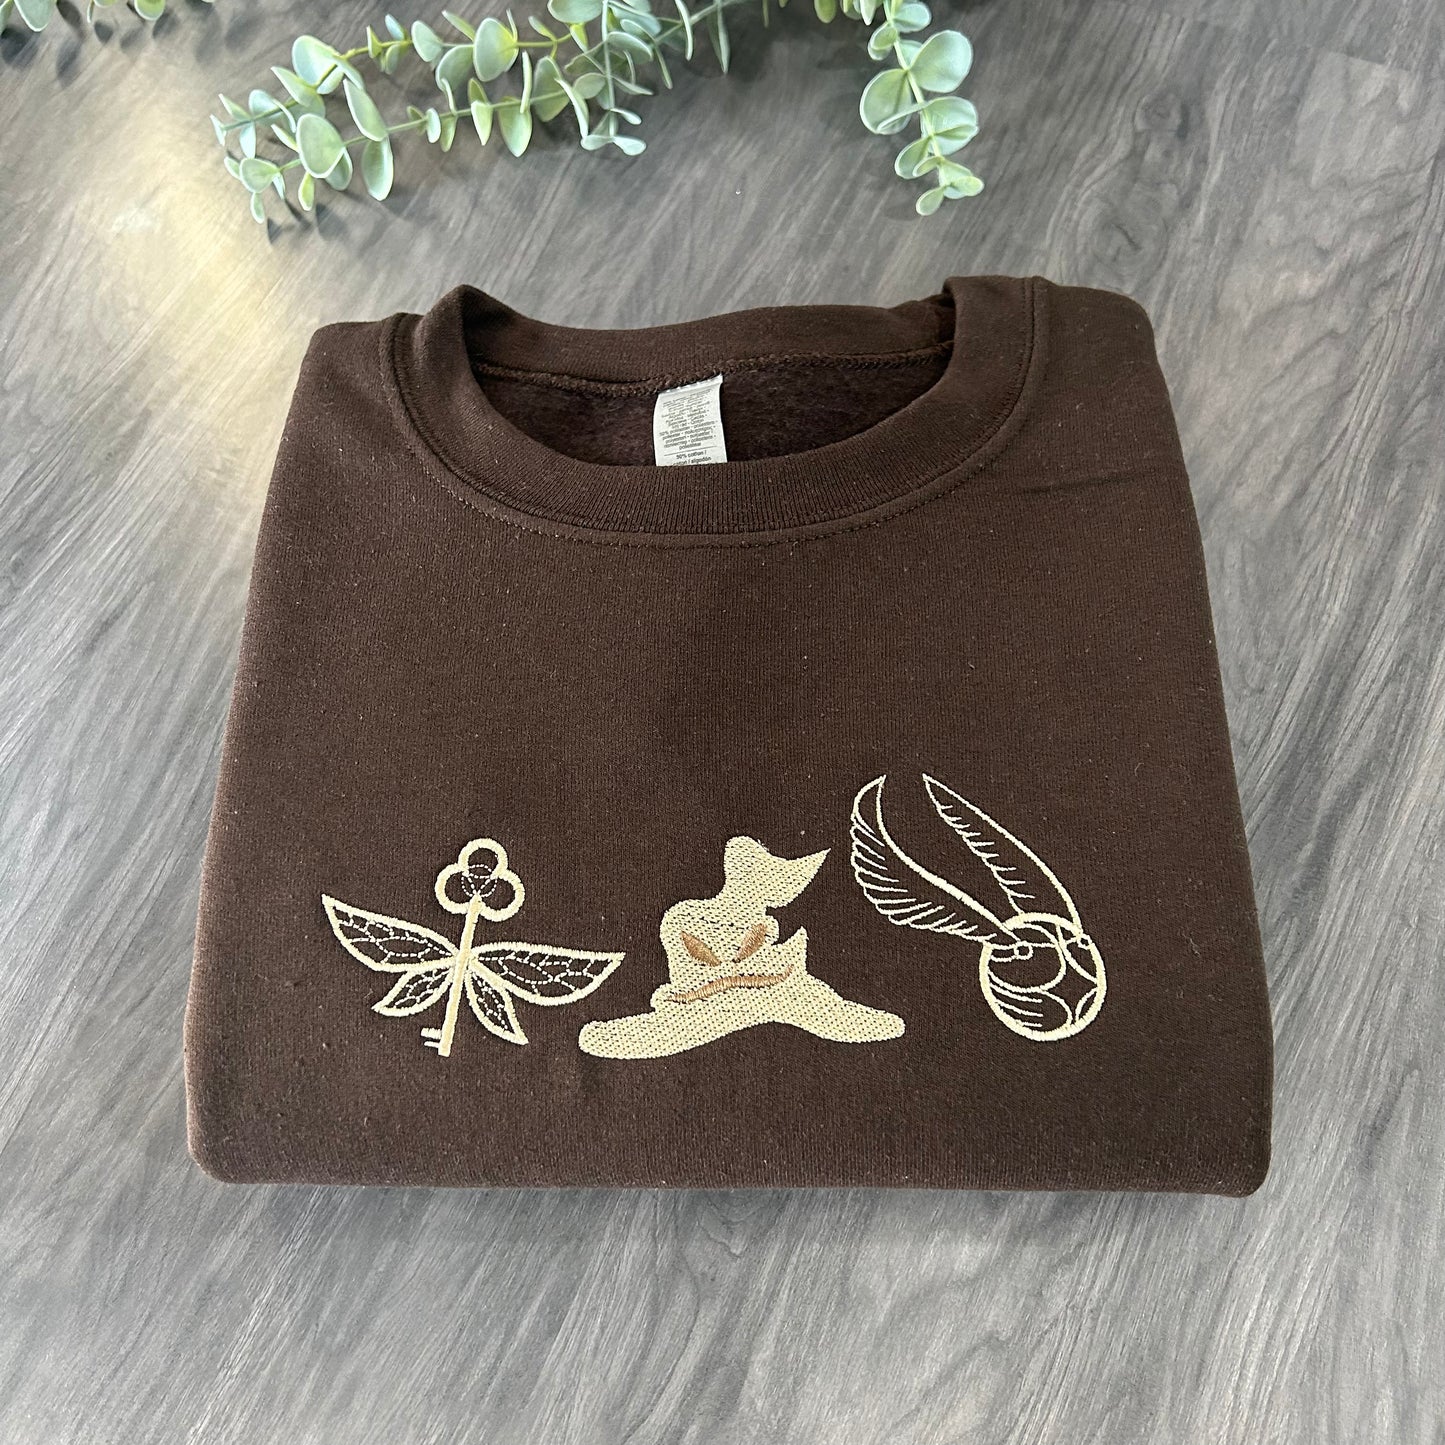 HARRY POTTER ICONS EMBROIDERED SWEATSHIRT